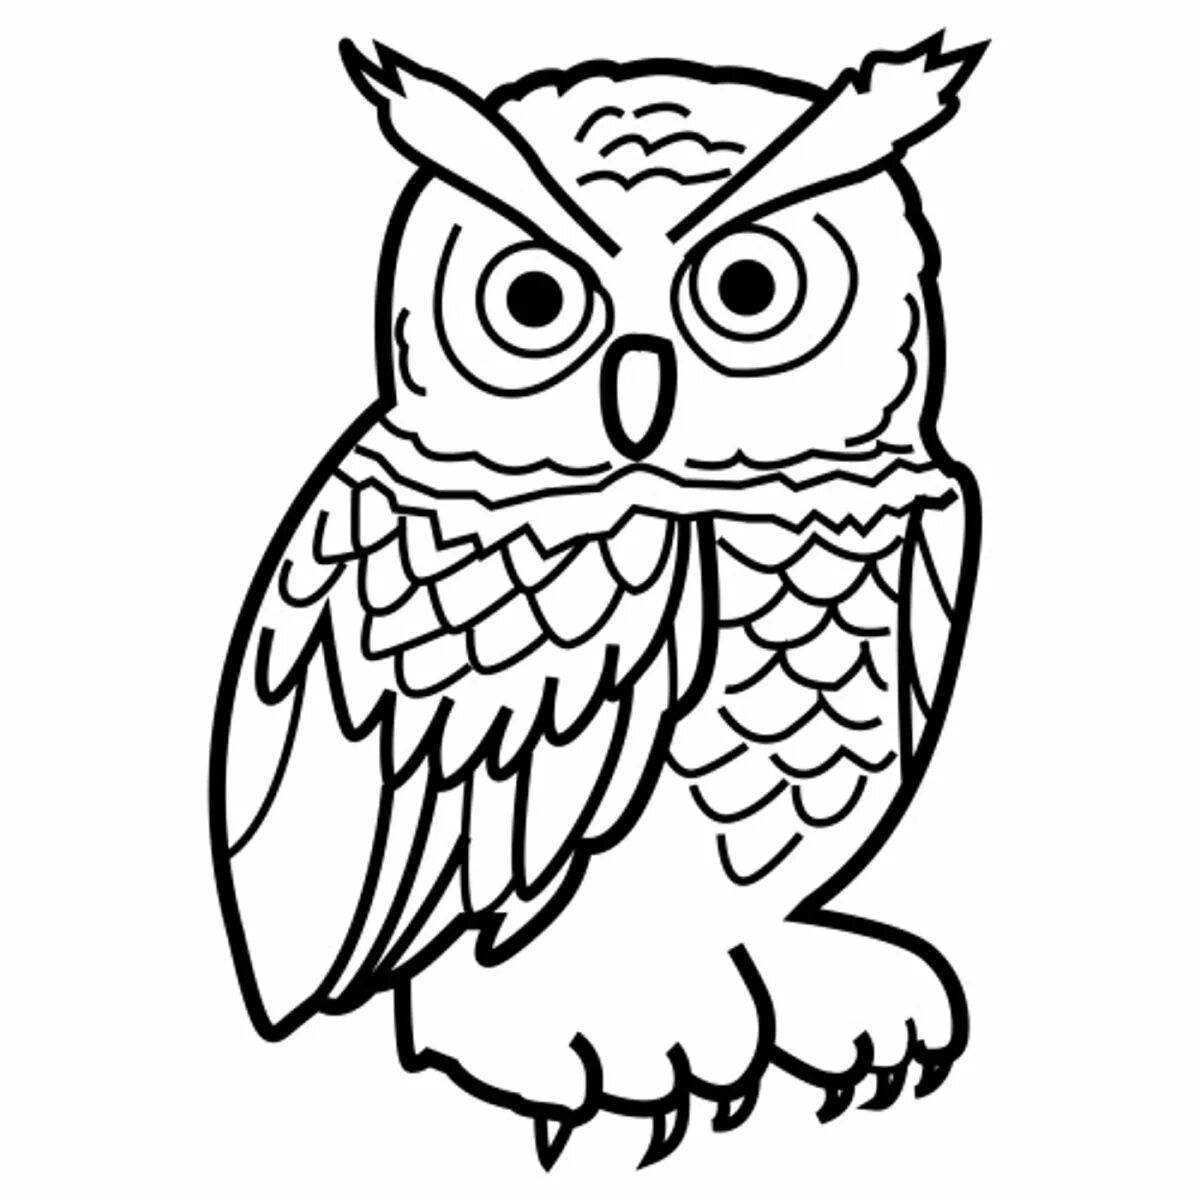 Cute owl coloring book for kids